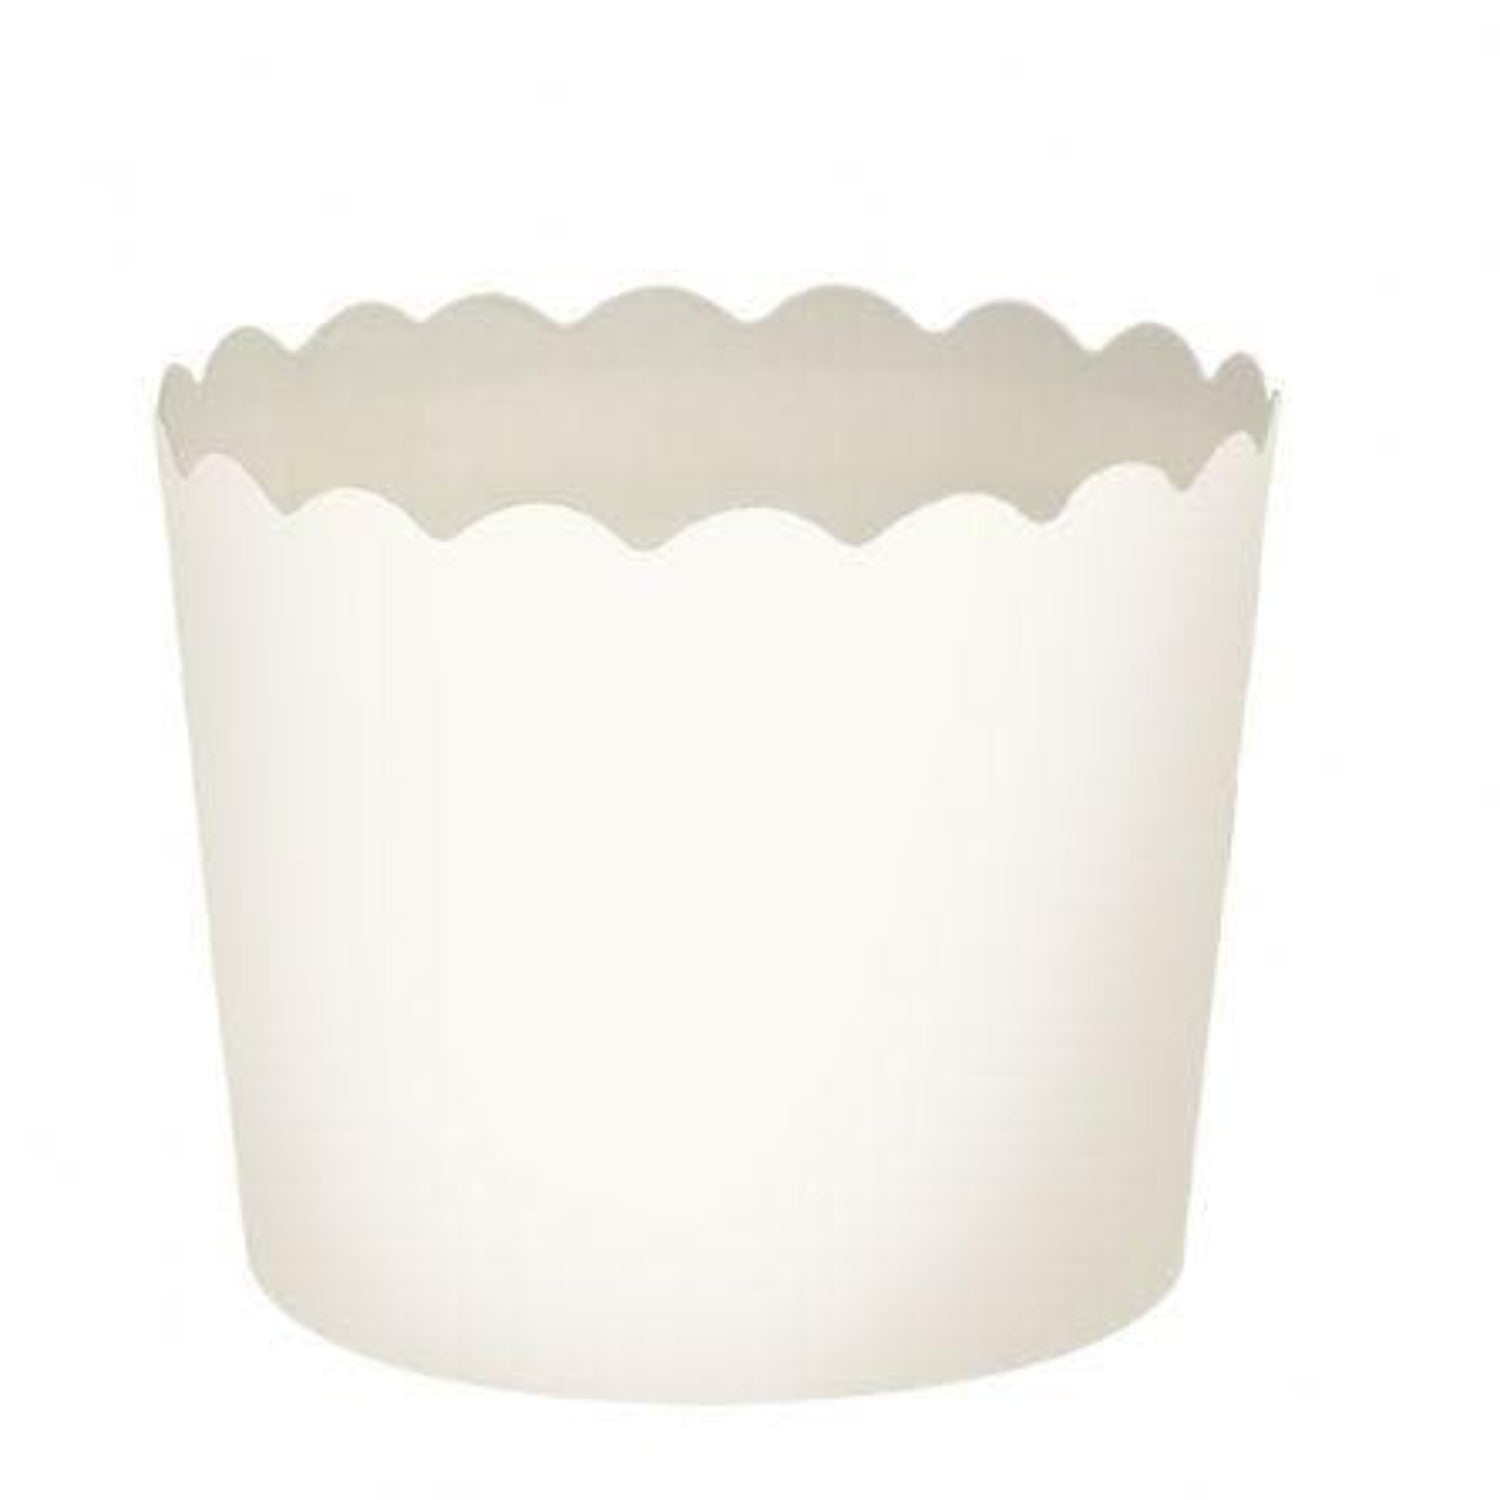 Simcha Collection Large Baking Cups White